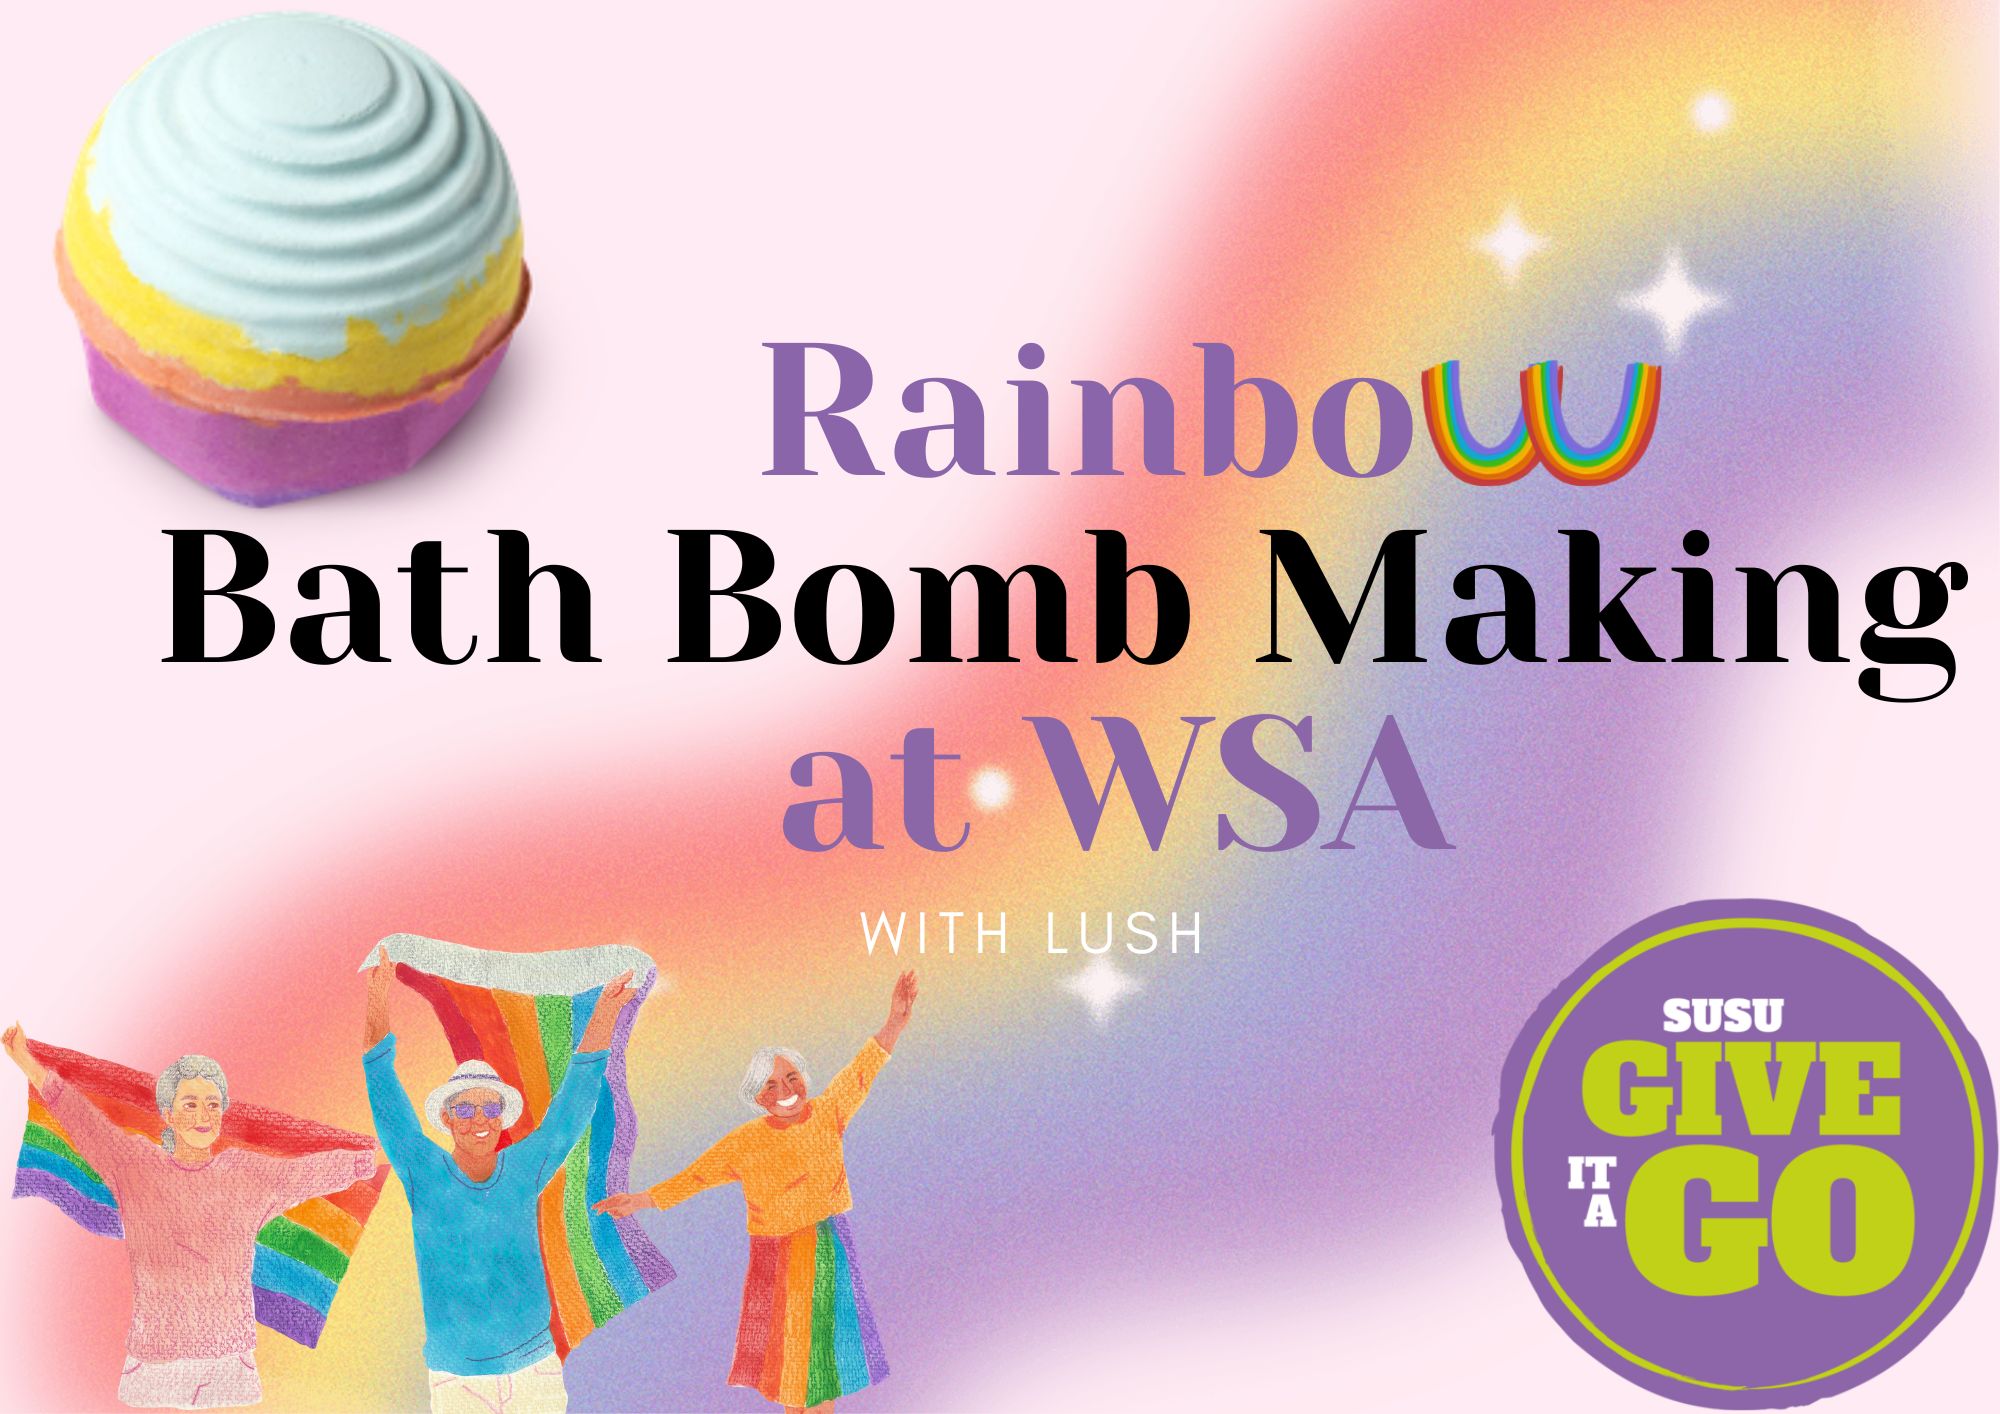 GIAG Crafternoon: Making Bath Bomb with LUSH (at WSA)